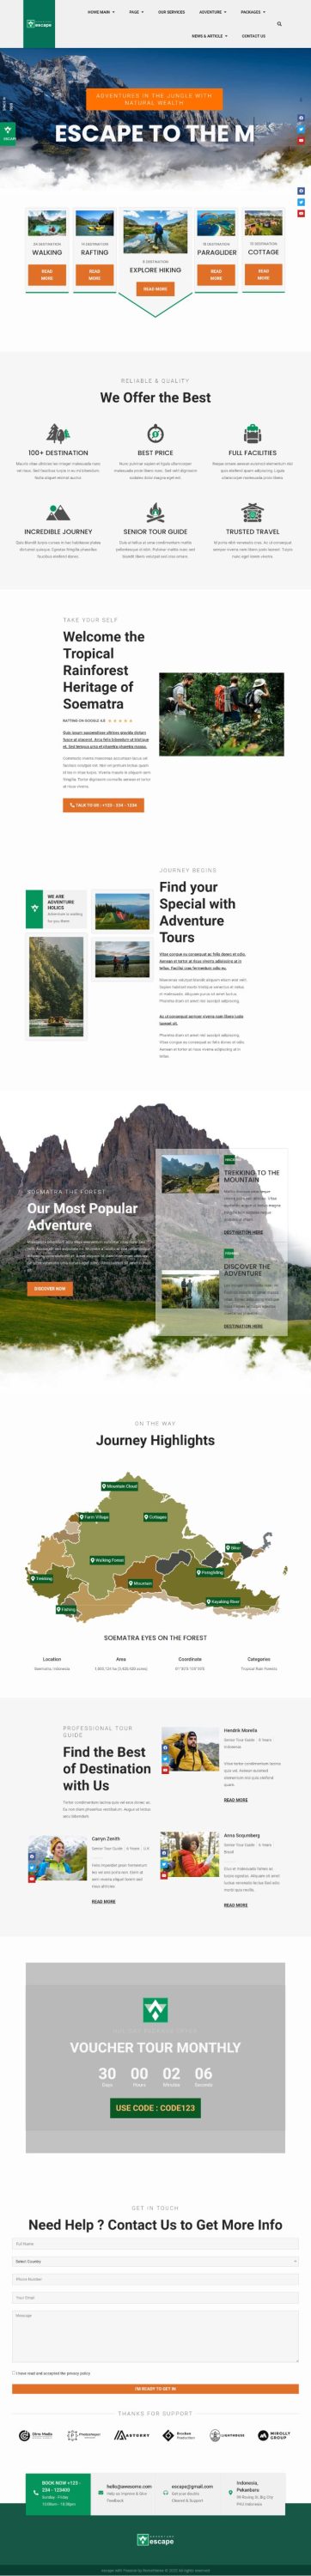 Template website du lịch - Forest Travel